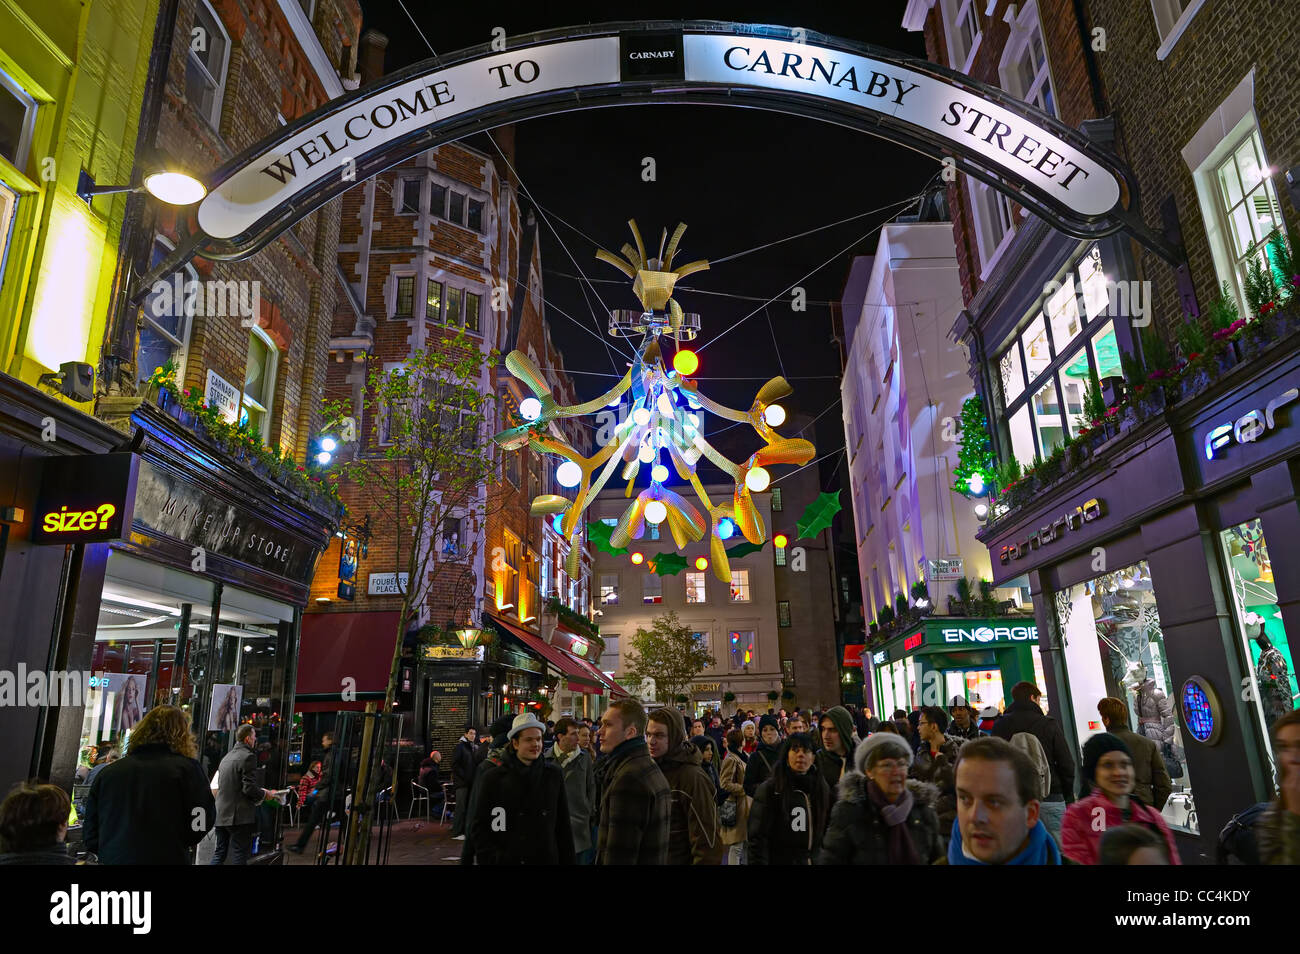 Carnaby Street full of Christmas shoppers, London, England, UK, with festive decorative lights at night Stock Photo